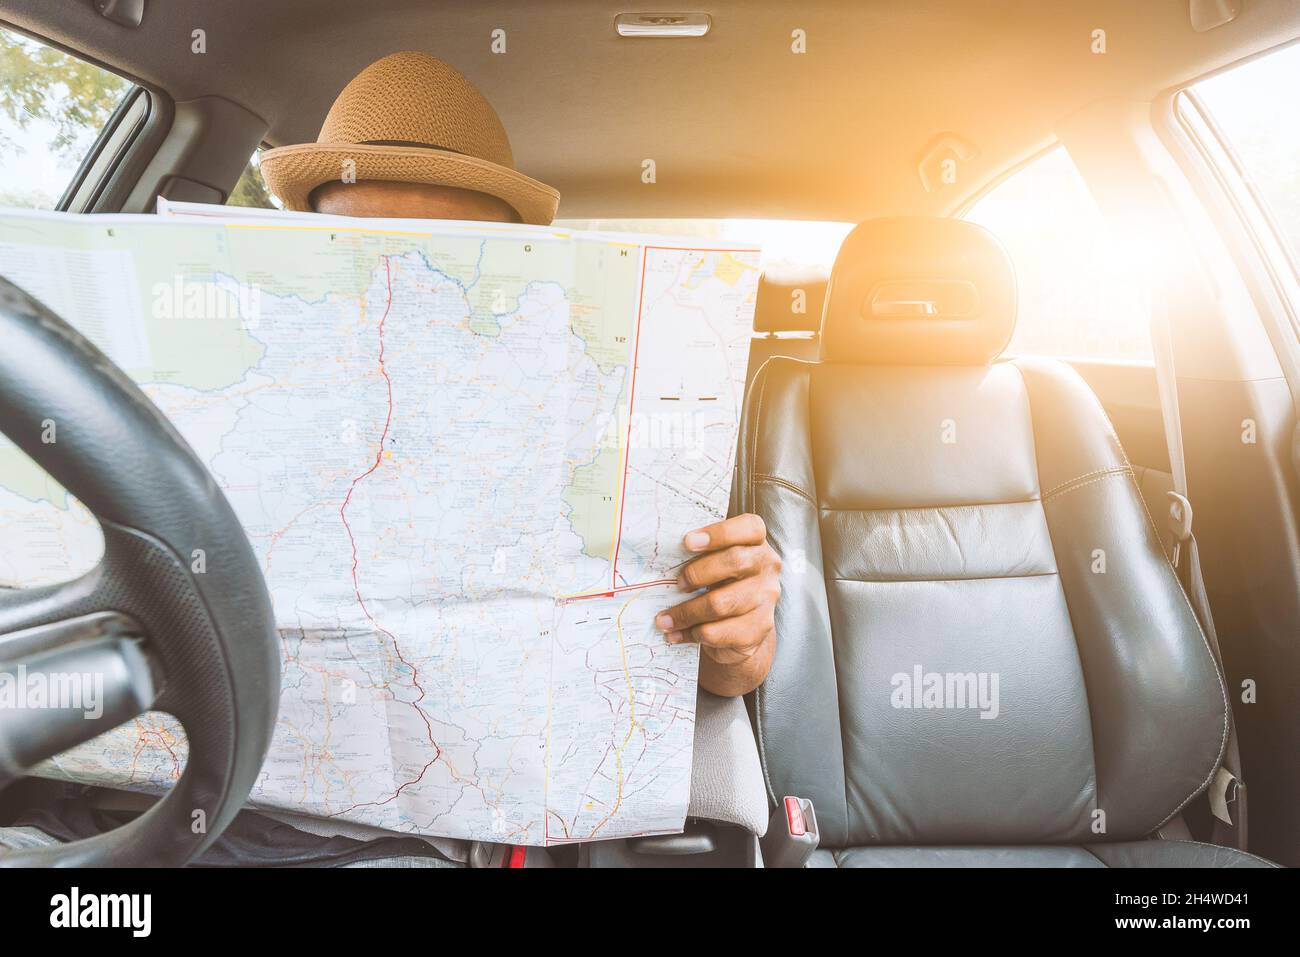 Man look at the map inside car Stock Photo